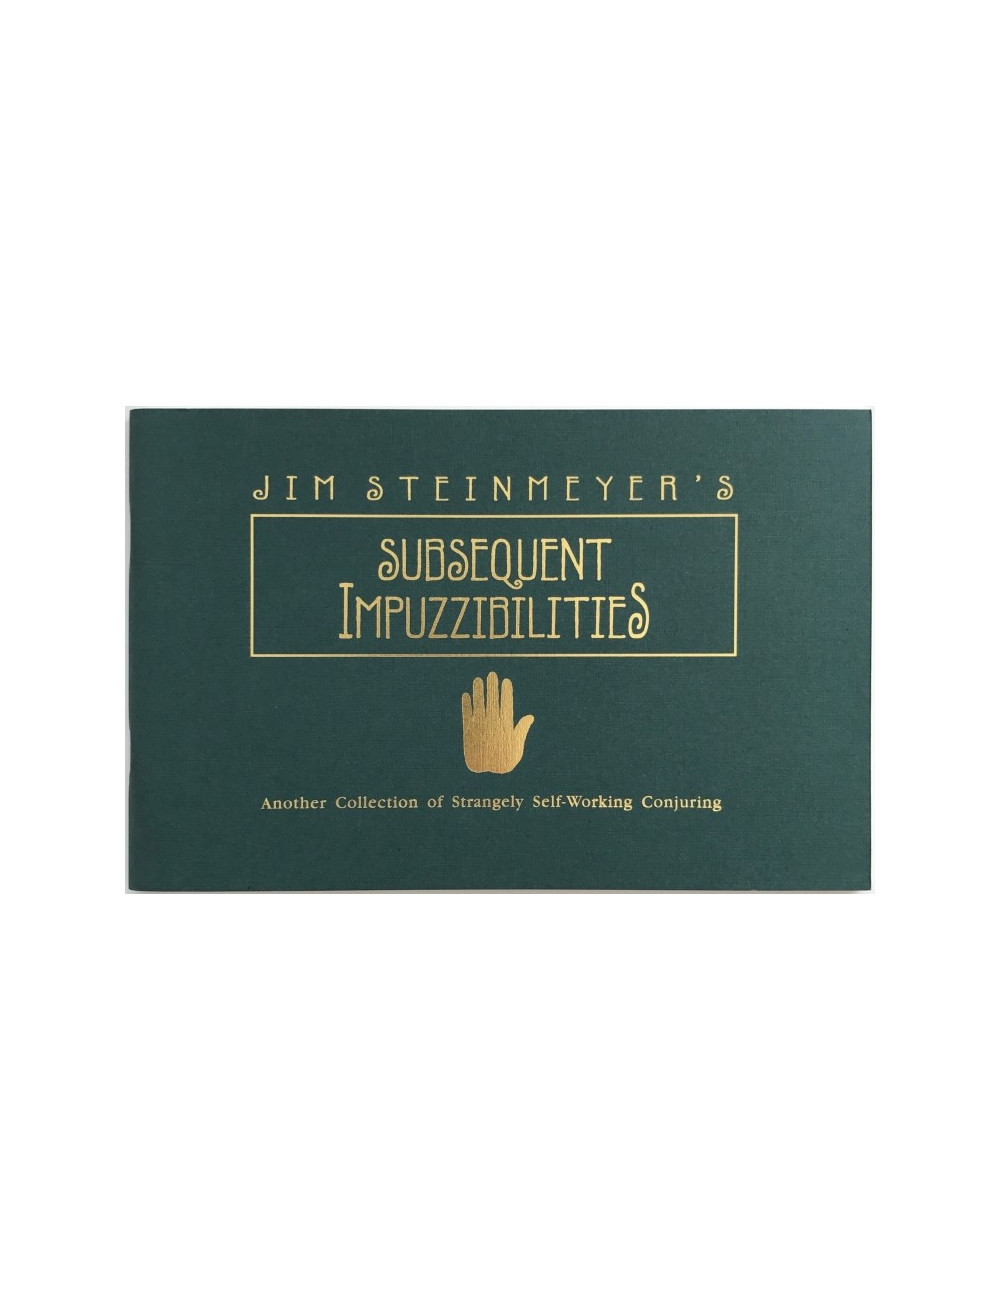 JIM STEINMEYER'S SUBSEQUENT IMPUZZIBILITIES